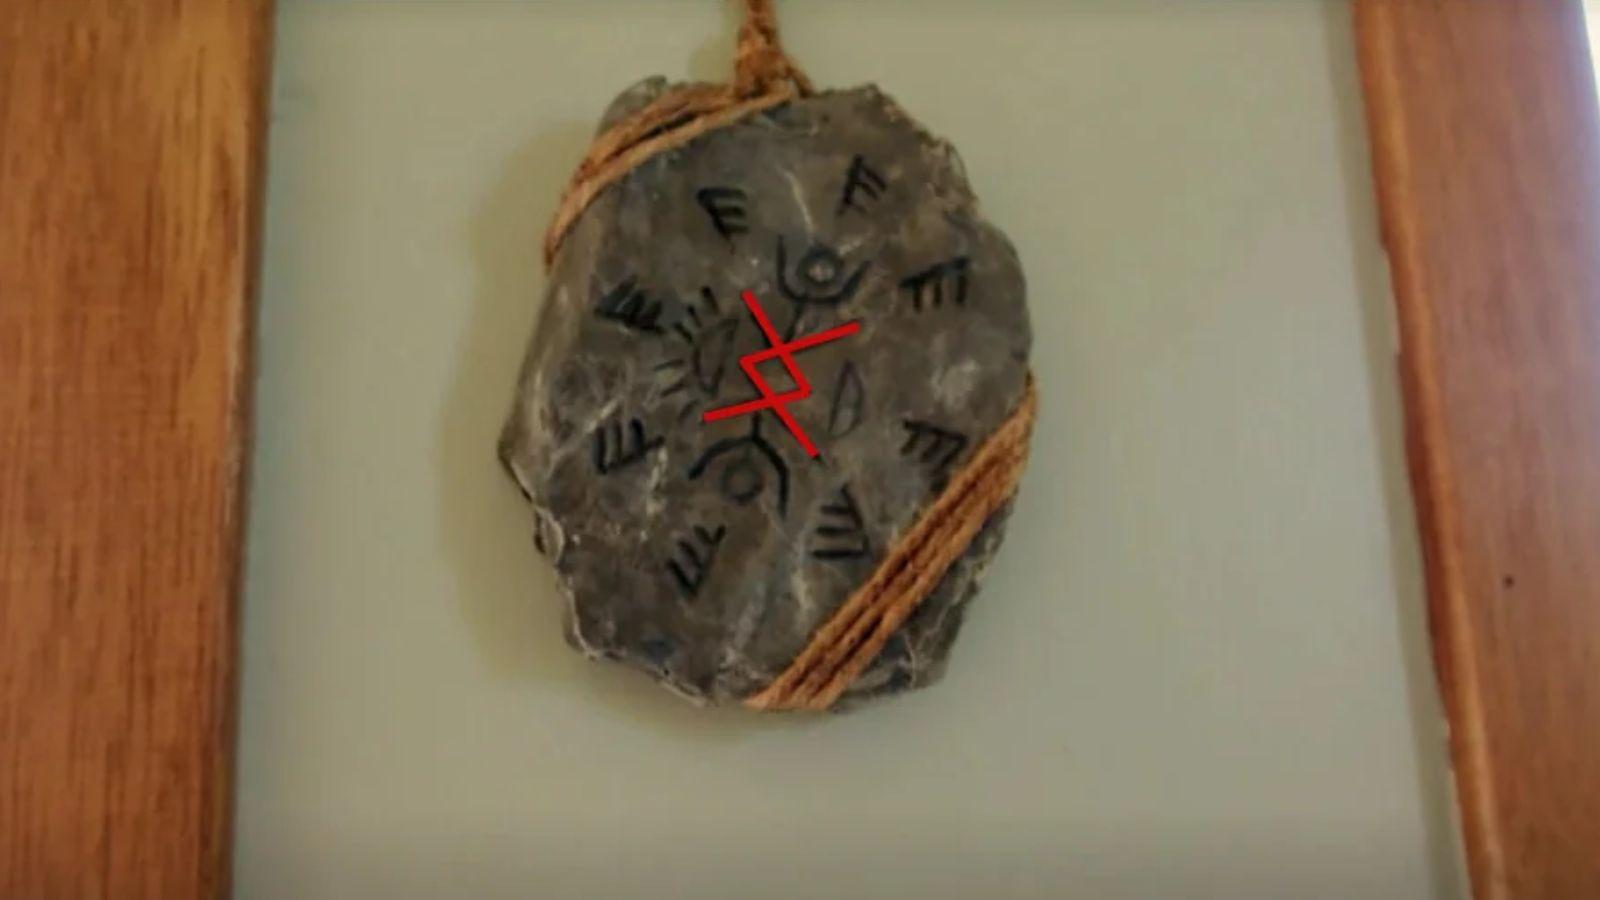 An image of a rune in From, with red markings overlaid to outline the ascribed rune.